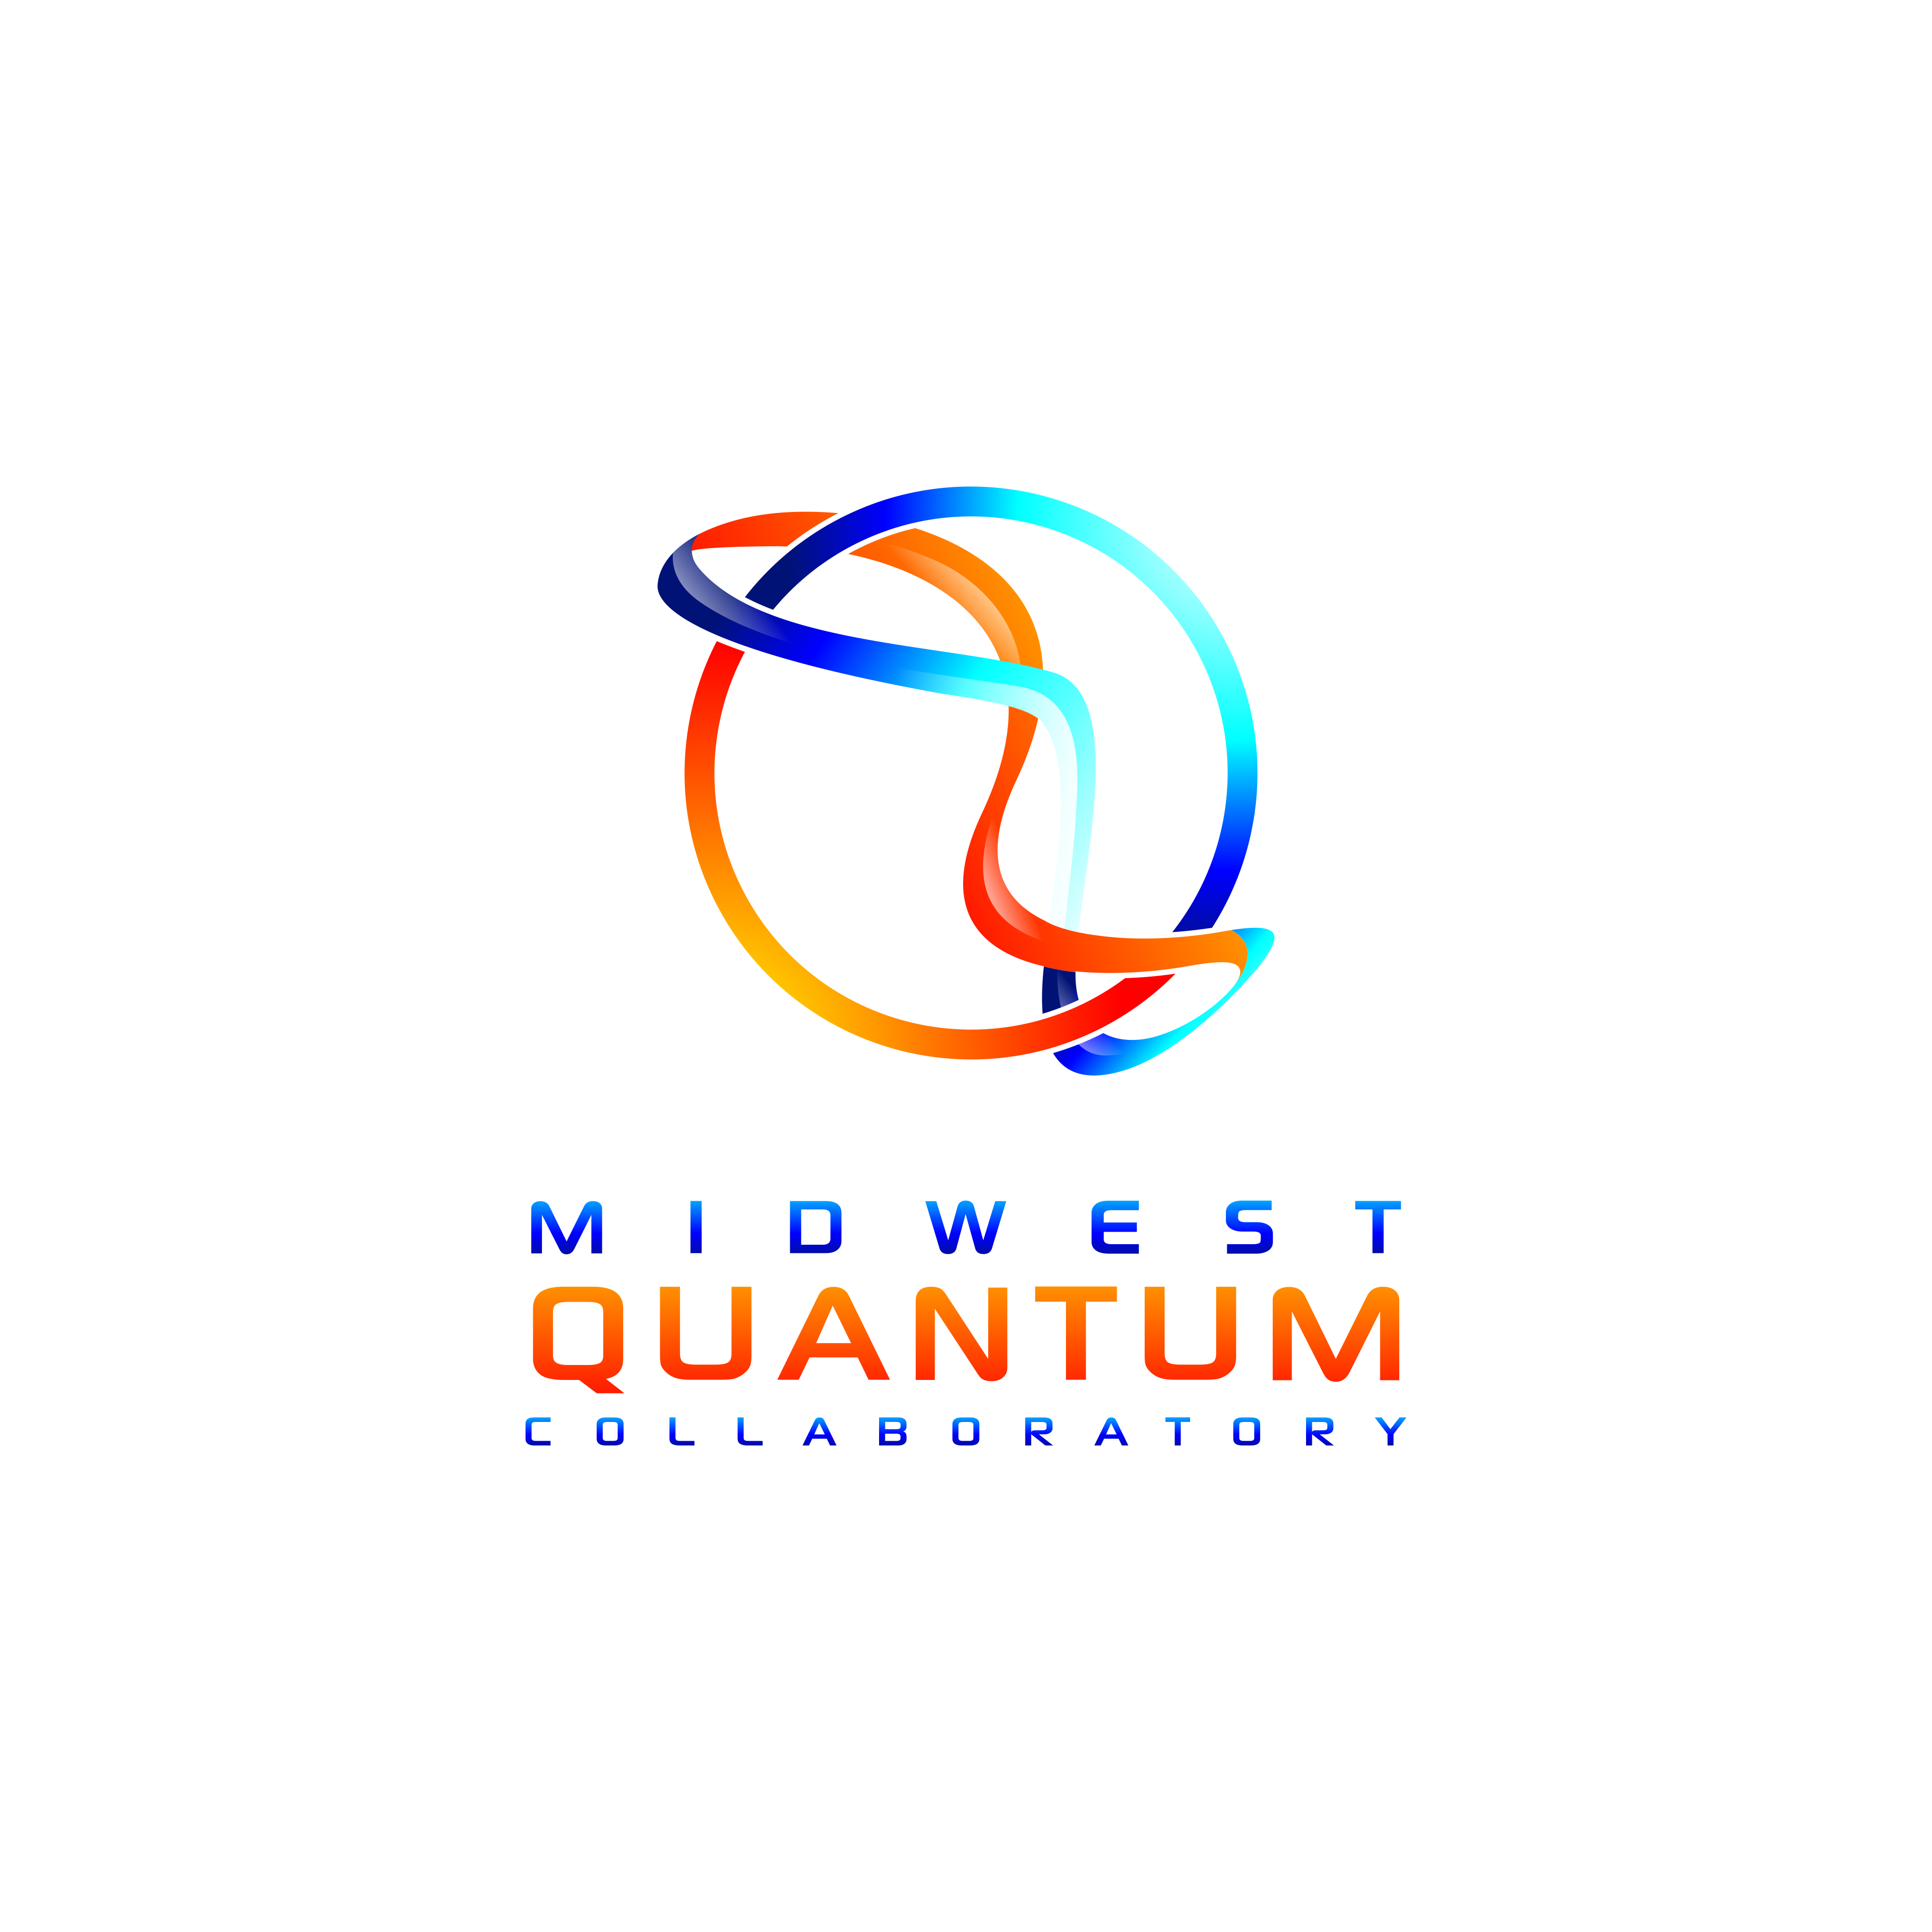 The MQC logo says Midwest Quantum Collaboratory and features a circle outline that's half orange and half blue. Bisecting the circle is a wavy, ribbon-like structure this is also half orange, half blue.